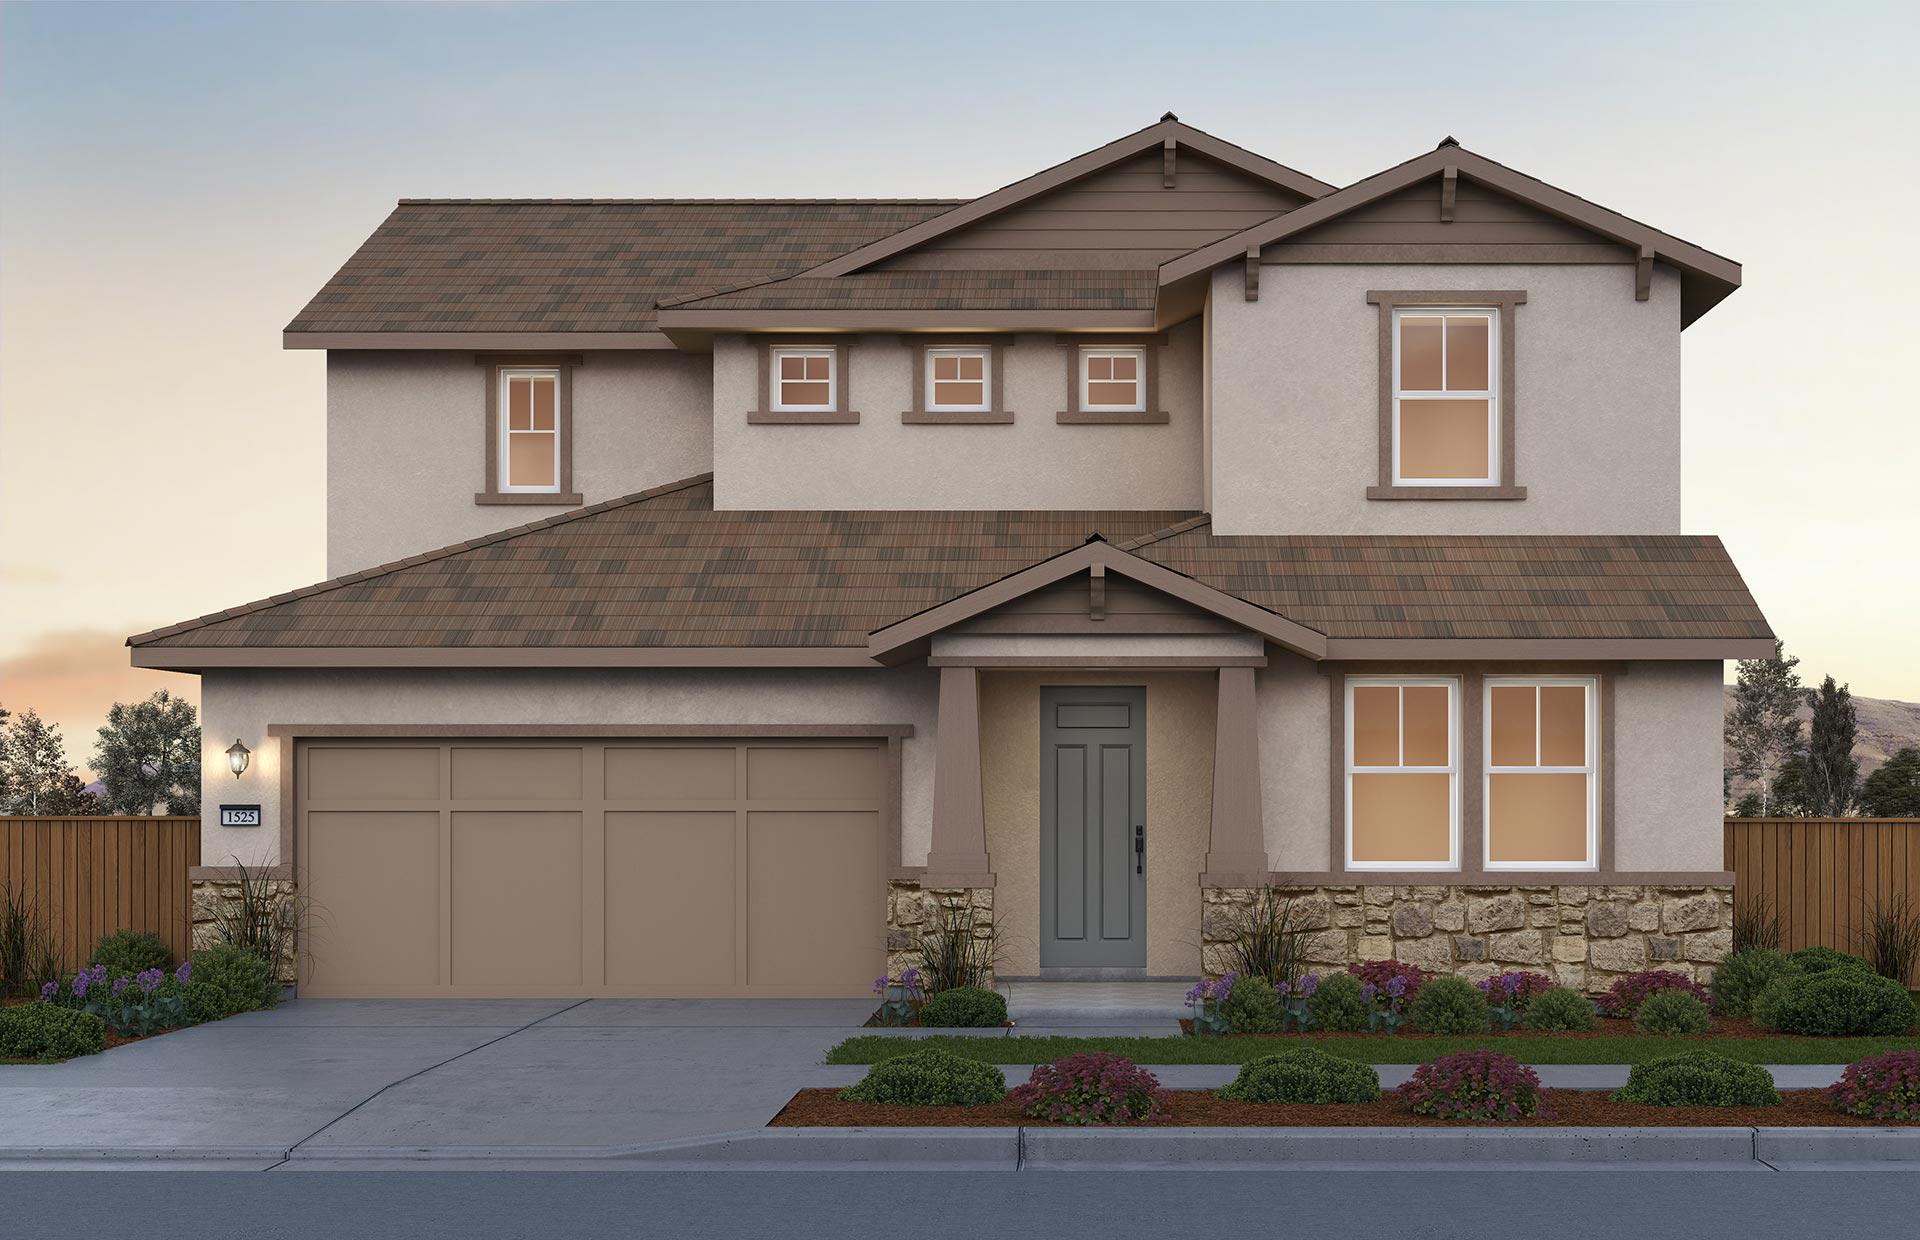 Plan 1 Home at Sunset by Pulte Homes at River Islands